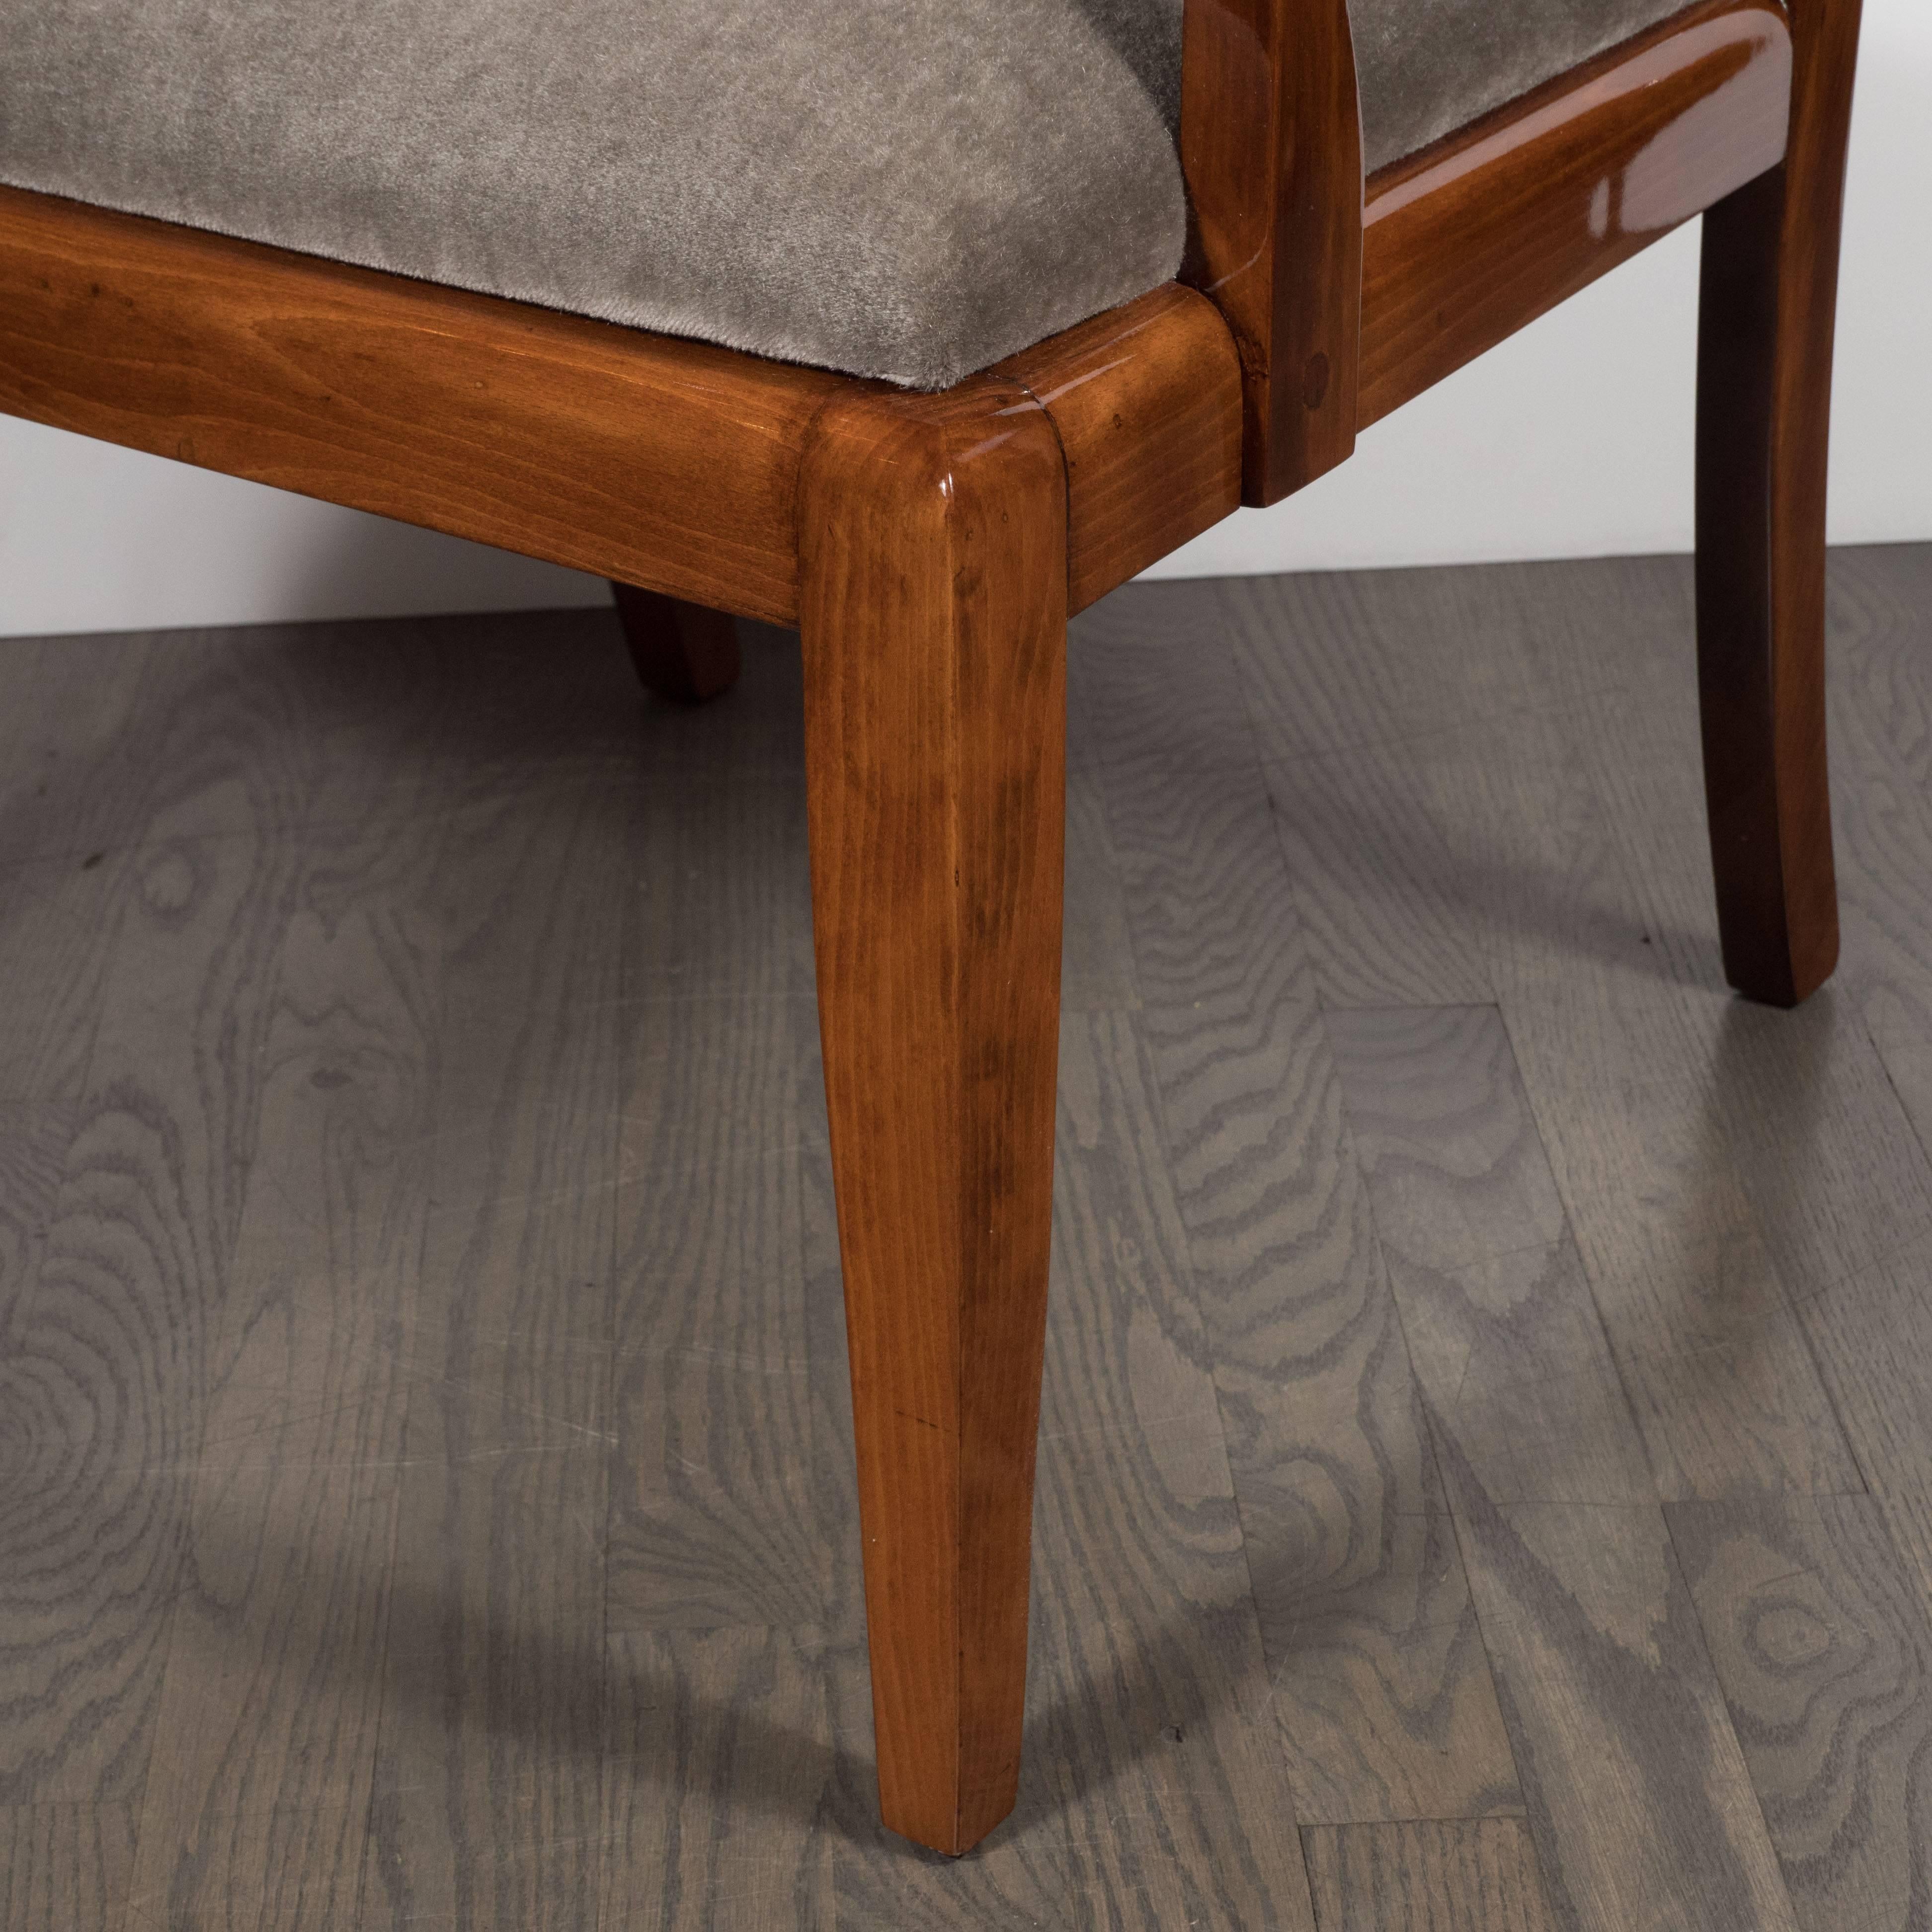 This stunning occasional chair was realized in the United States, circa 1930, from polished walnut. It is a unique and idiosyncratic example of Art Deco Machine Age design in America, sure to delight any collector of the period. It features saber